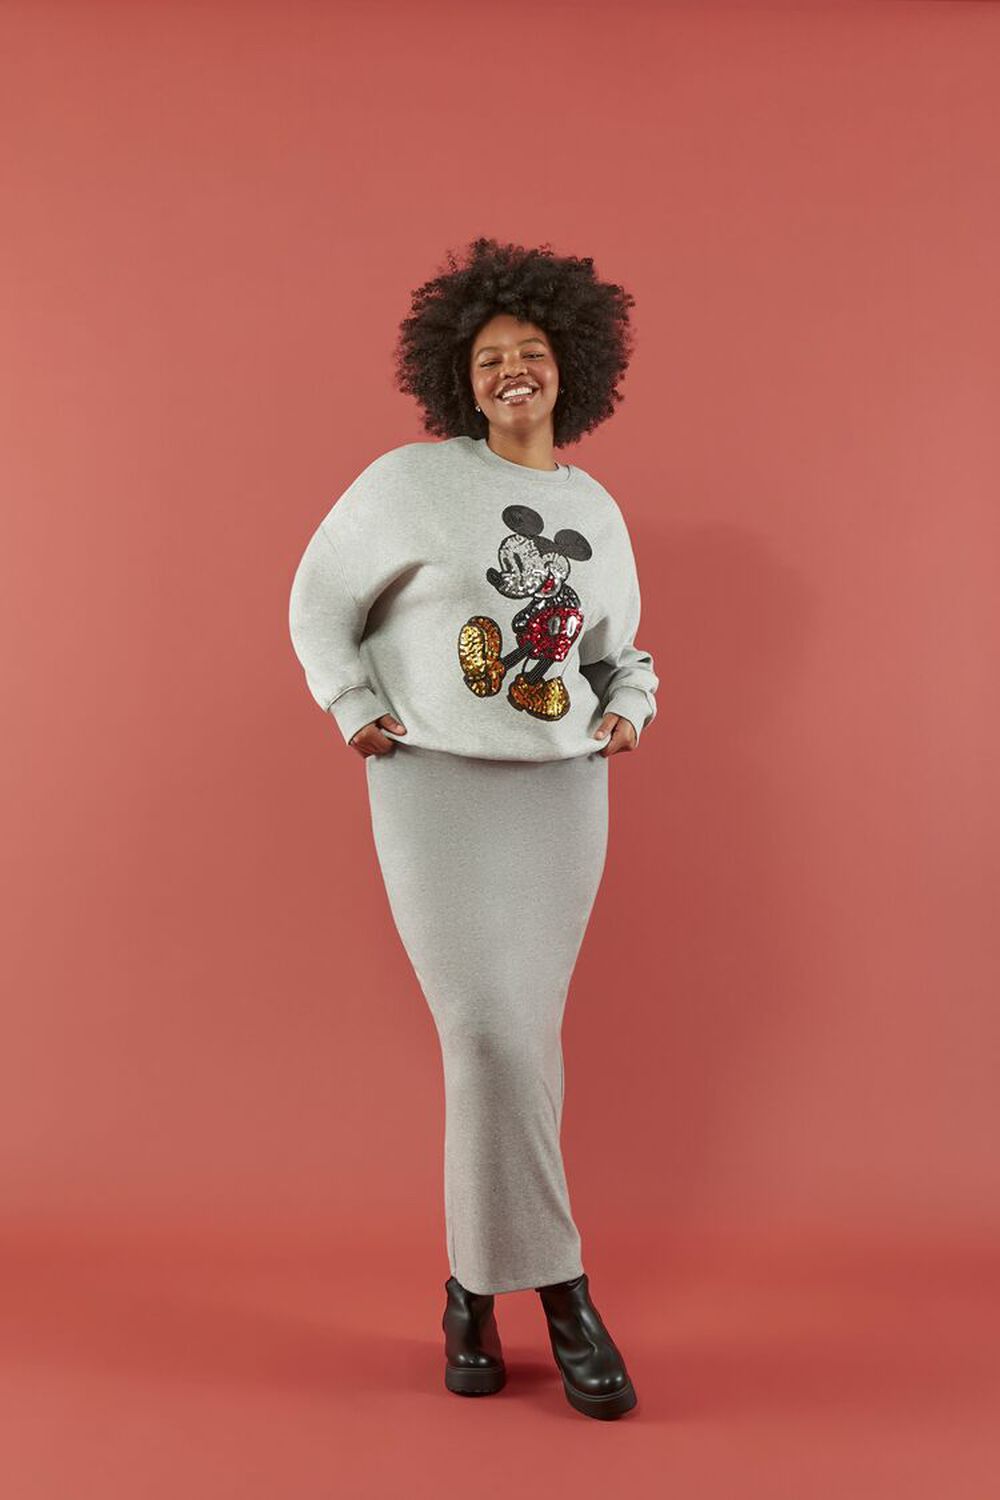 Plus Size Disney Leggings and Shirts. Curvy Collection of Disney